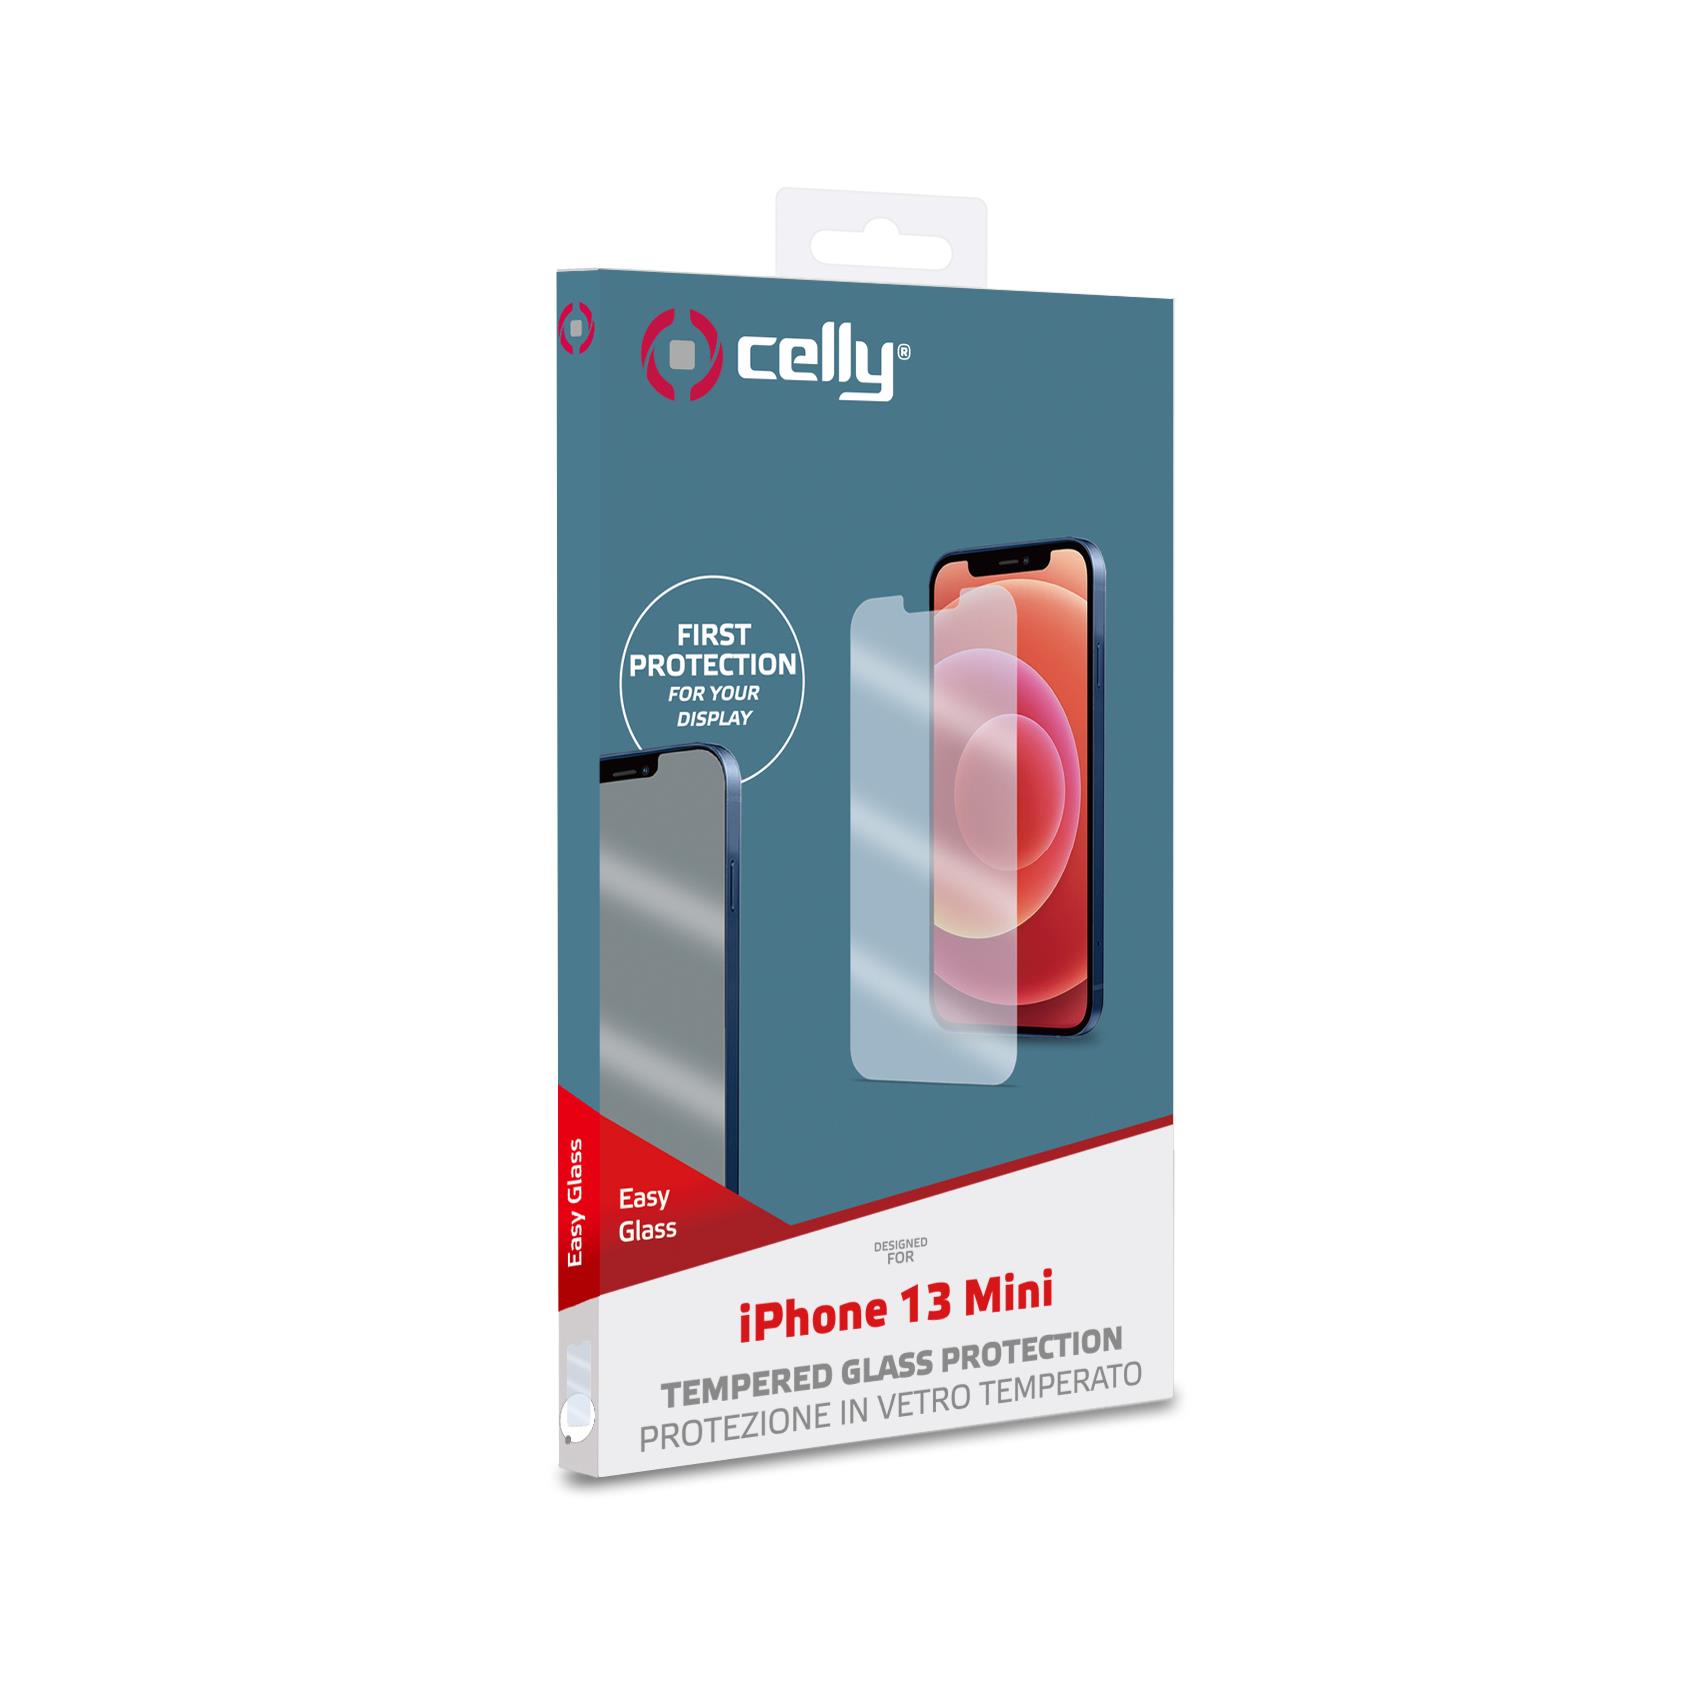 Easy Glass Iphone 13 Mini Celly Easy1006 8021735190325